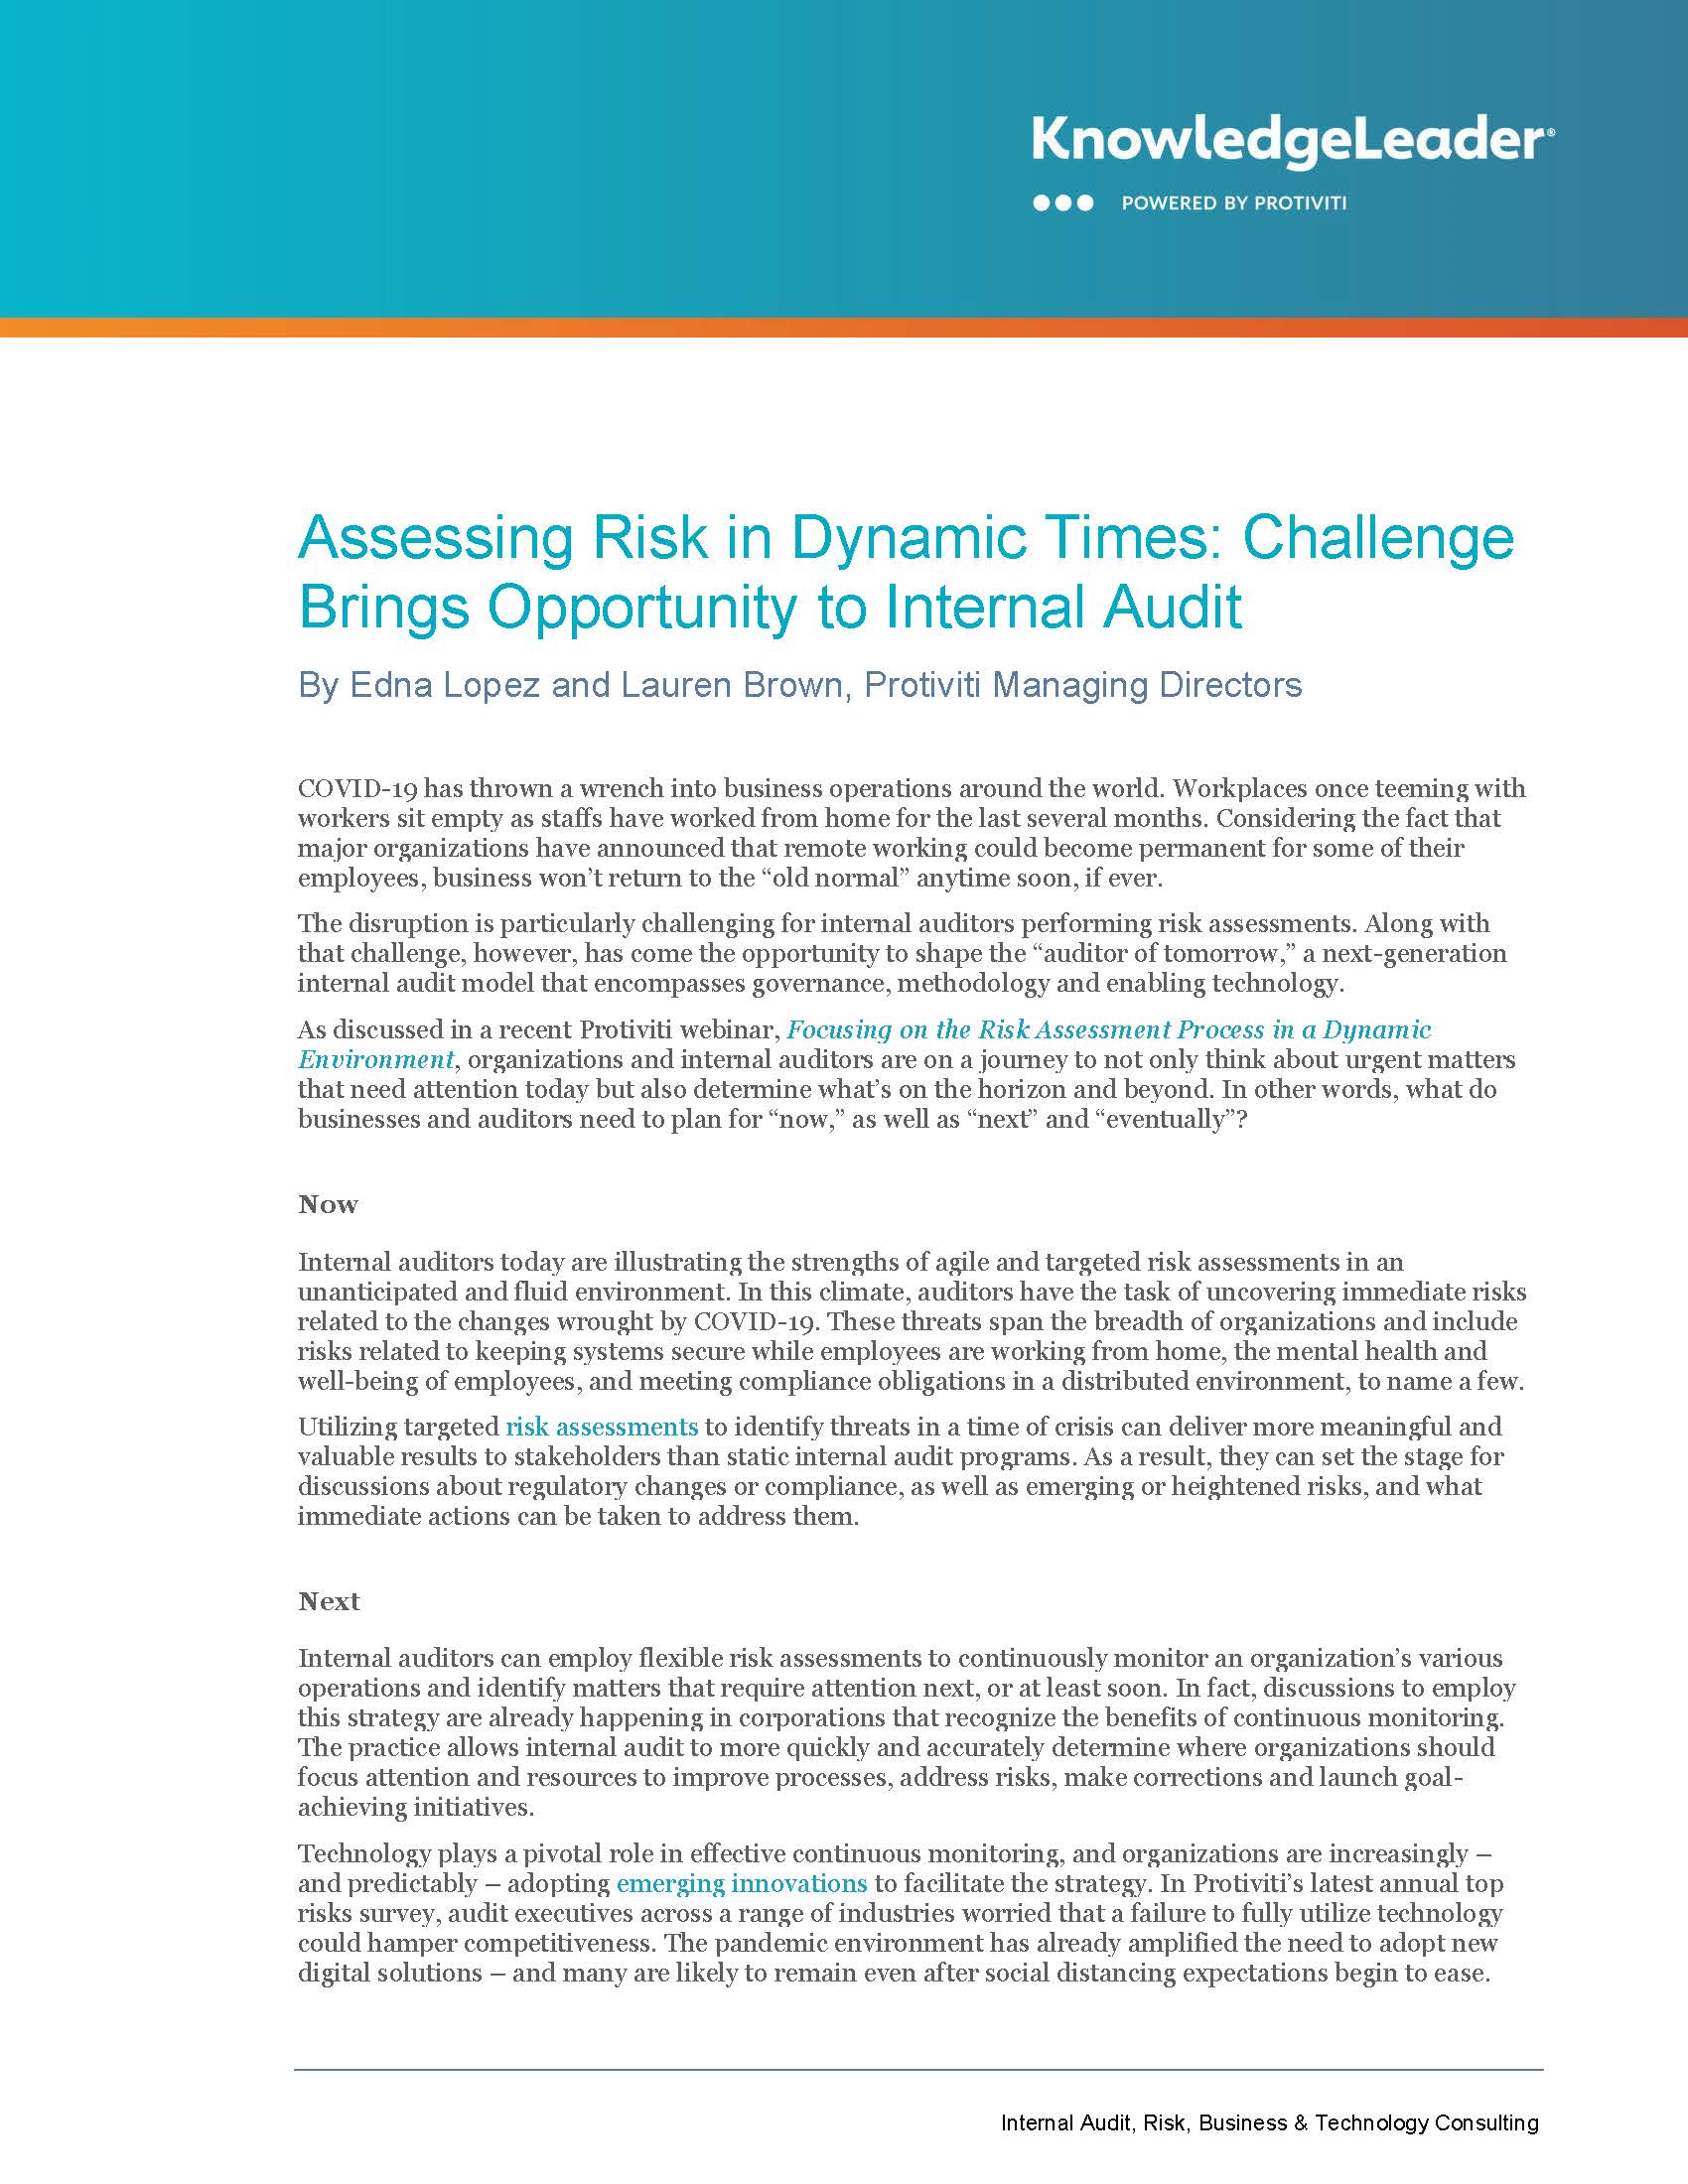 Screenshot of the first page of (Assessing Risk in Dynamic Times: Challenge Brings Opportunity to Internal Audit)